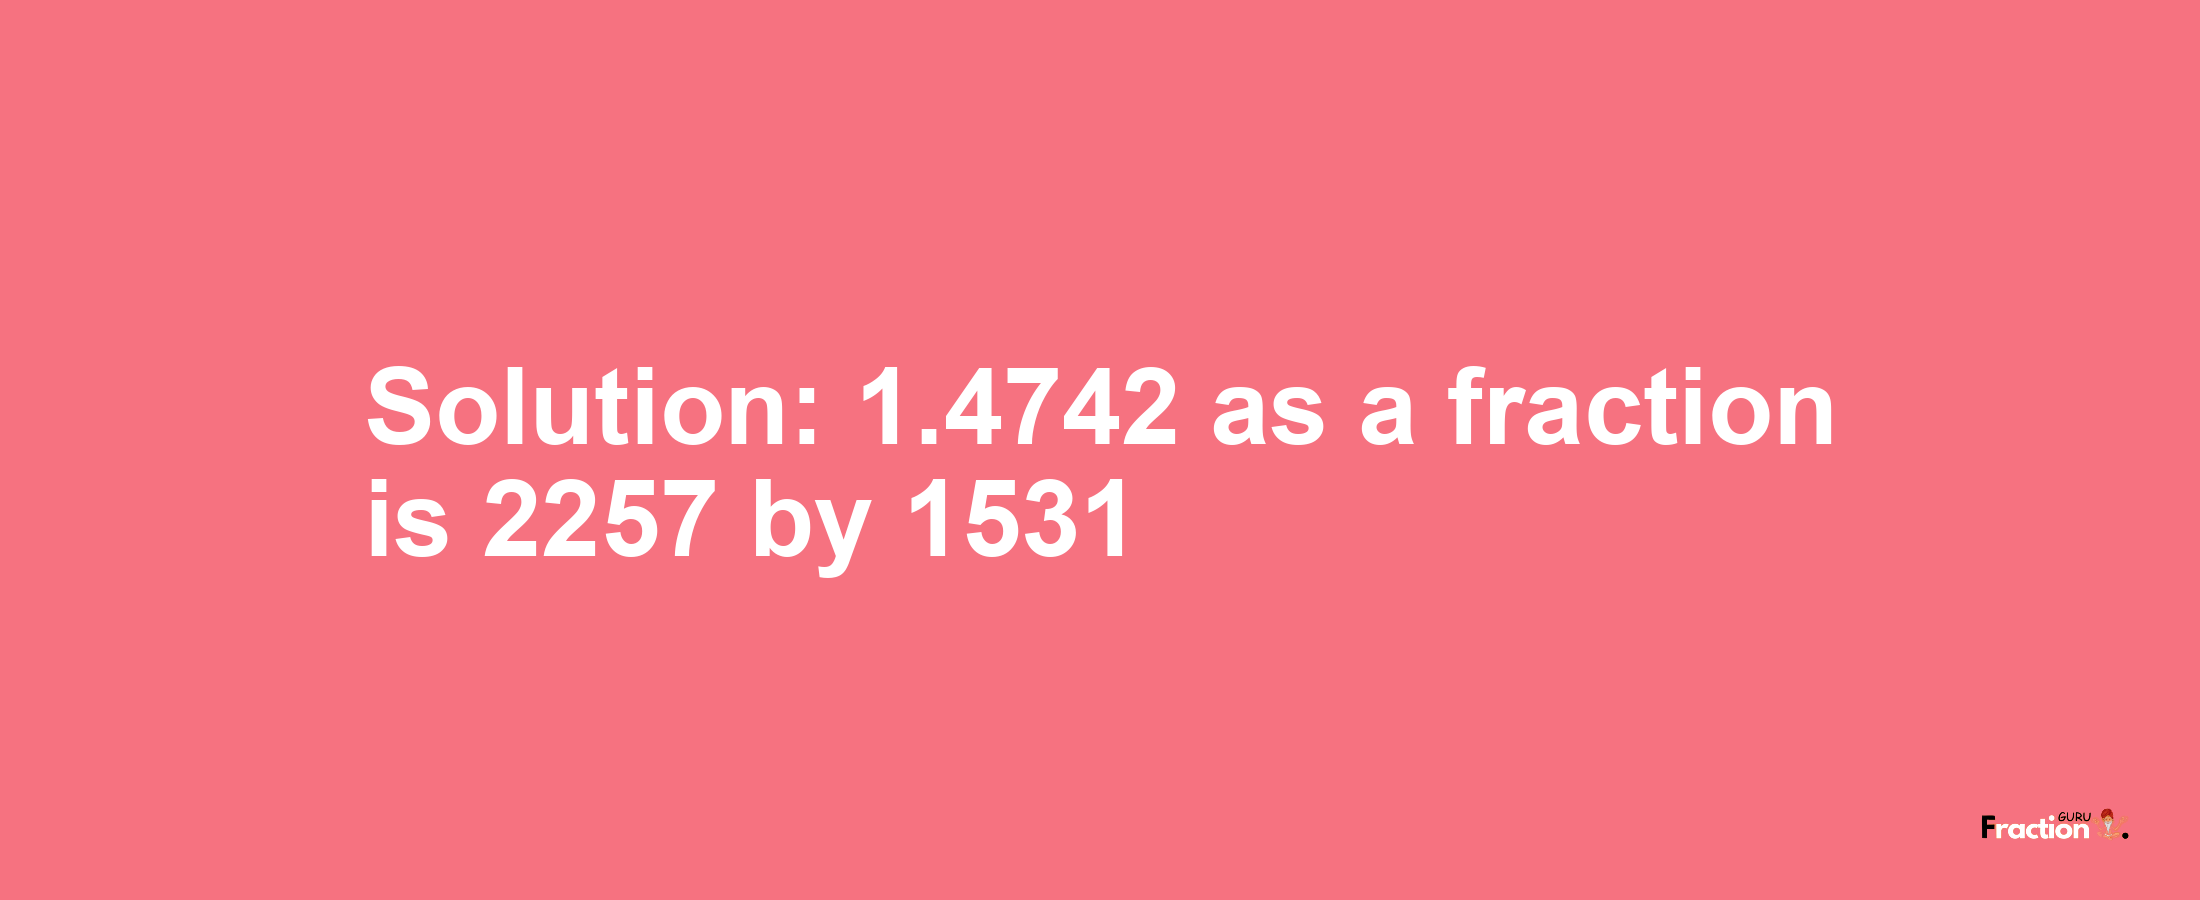 Solution:1.4742 as a fraction is 2257/1531